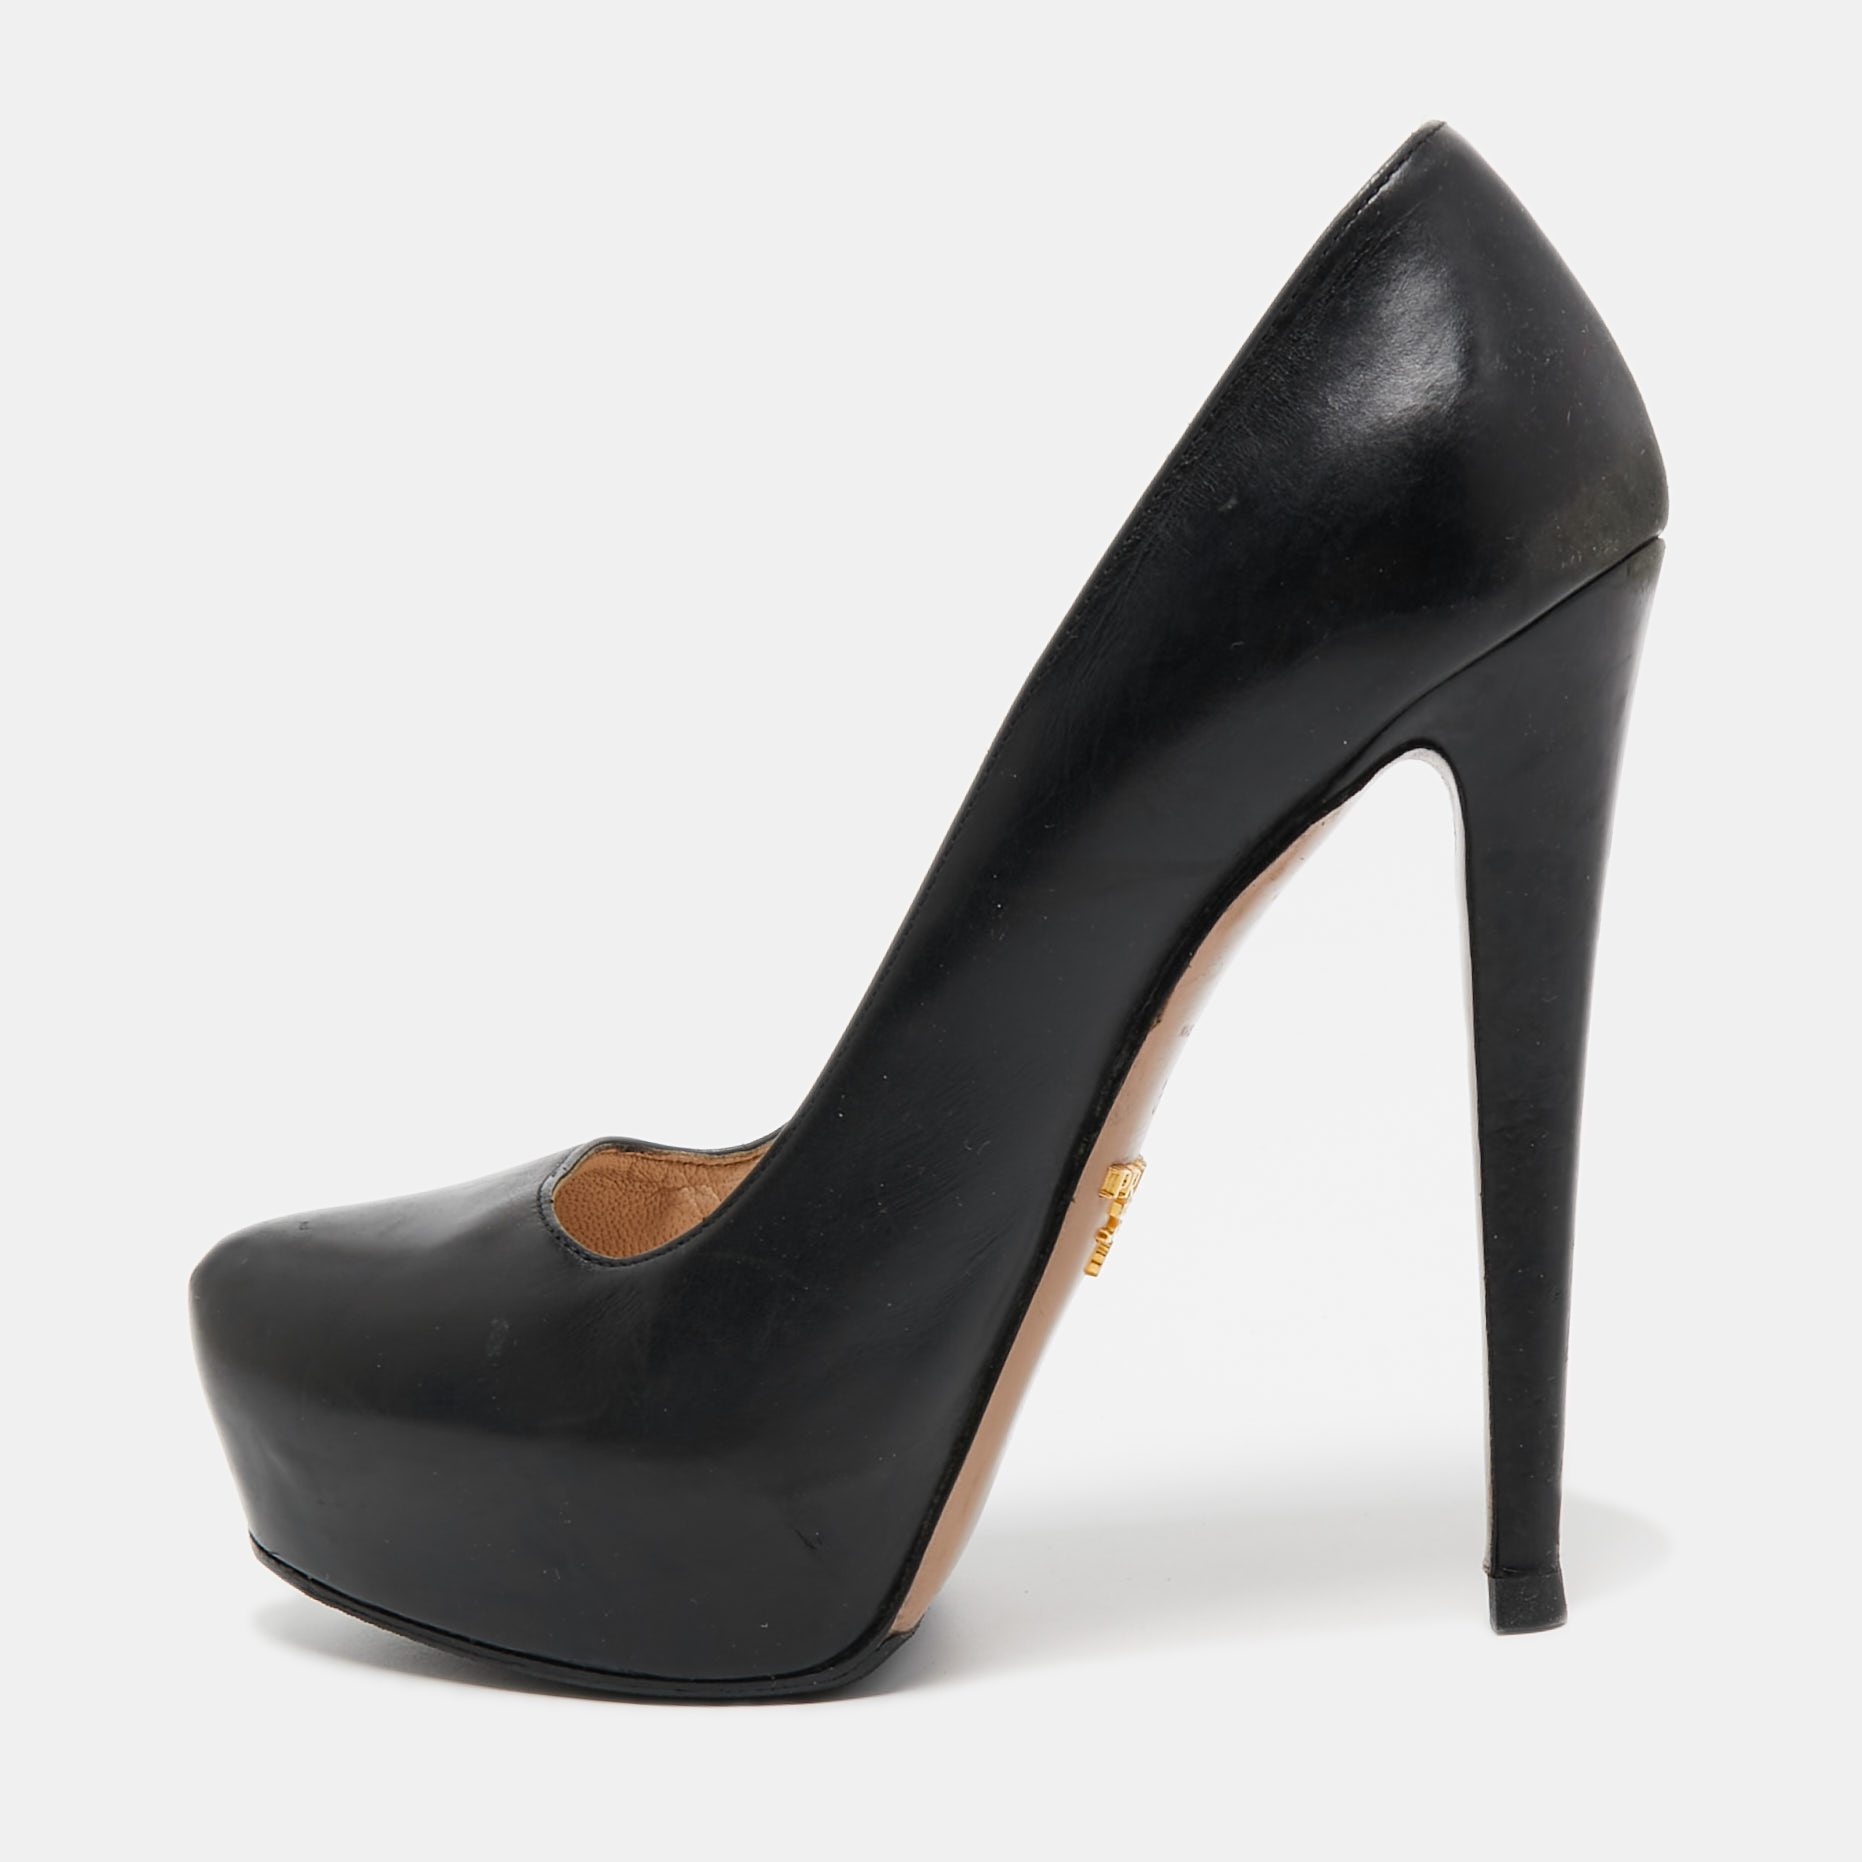 The fashion house's tradition of excellence coupled with modern design sensibilities works to make these Prada black pumps a fabulous choice. Theyll help you deliver a chic look with ease.